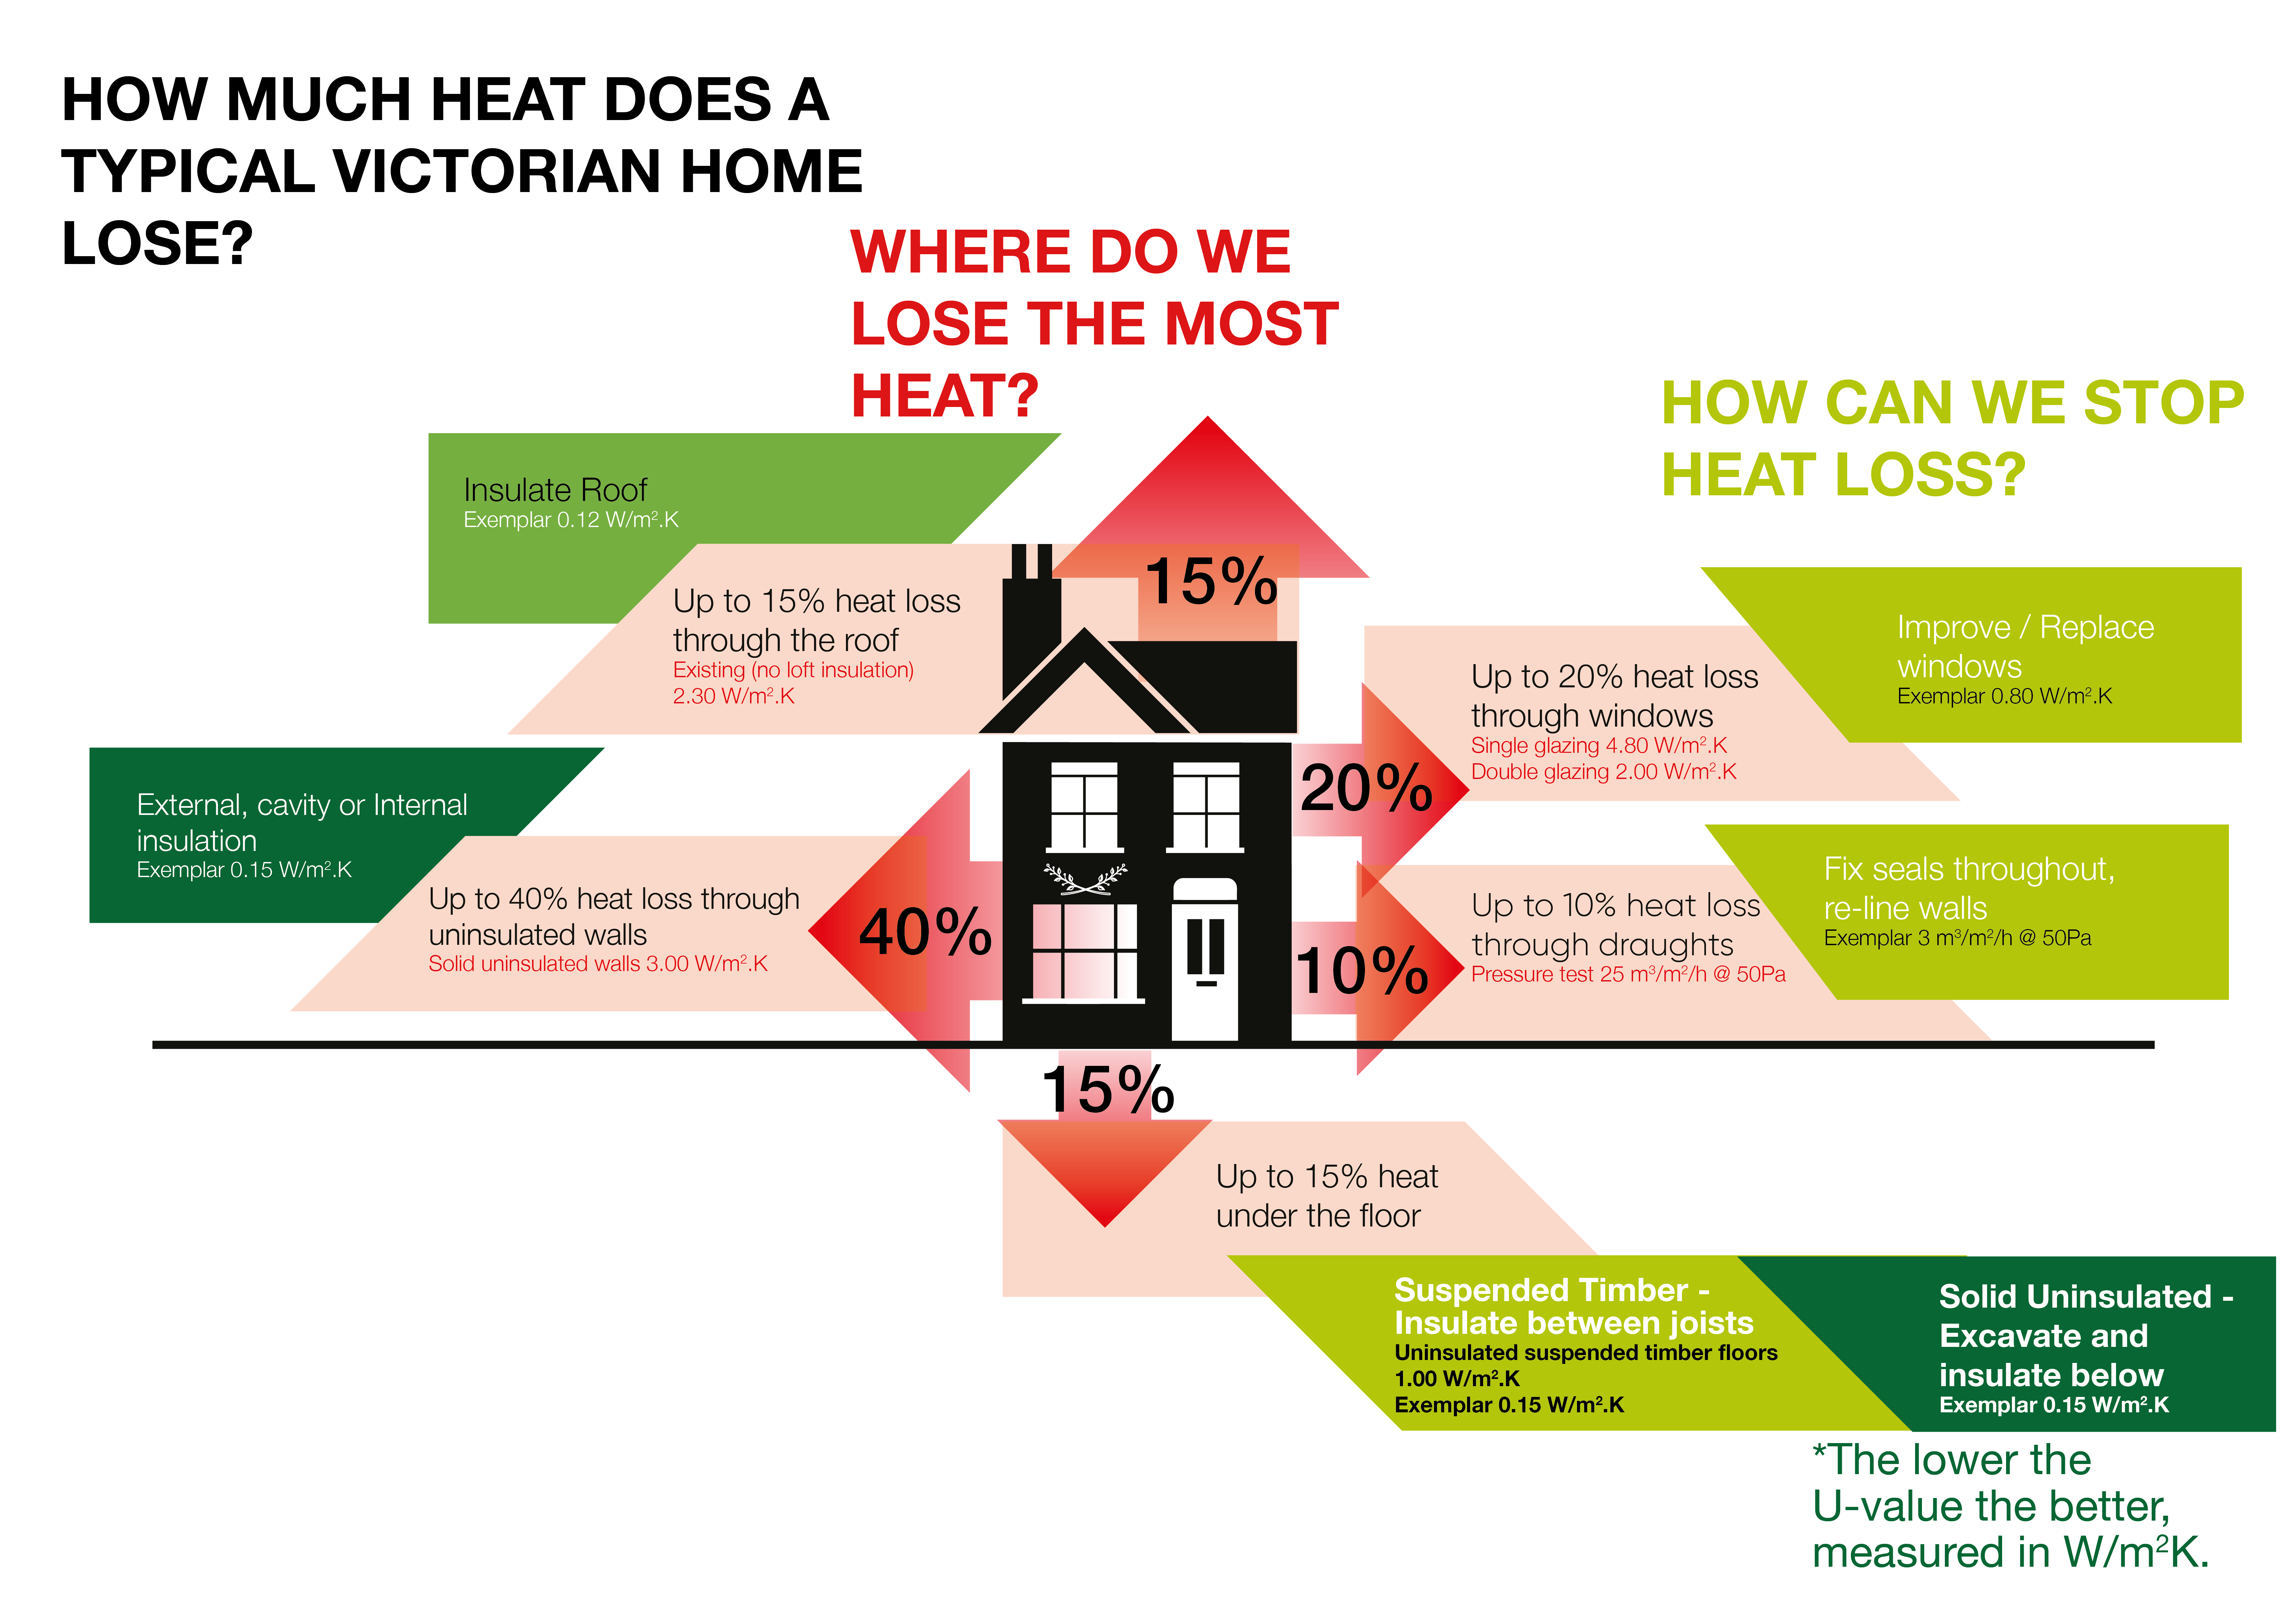 A house surrounded by text describing where houses lose the most heat and how we can stop it